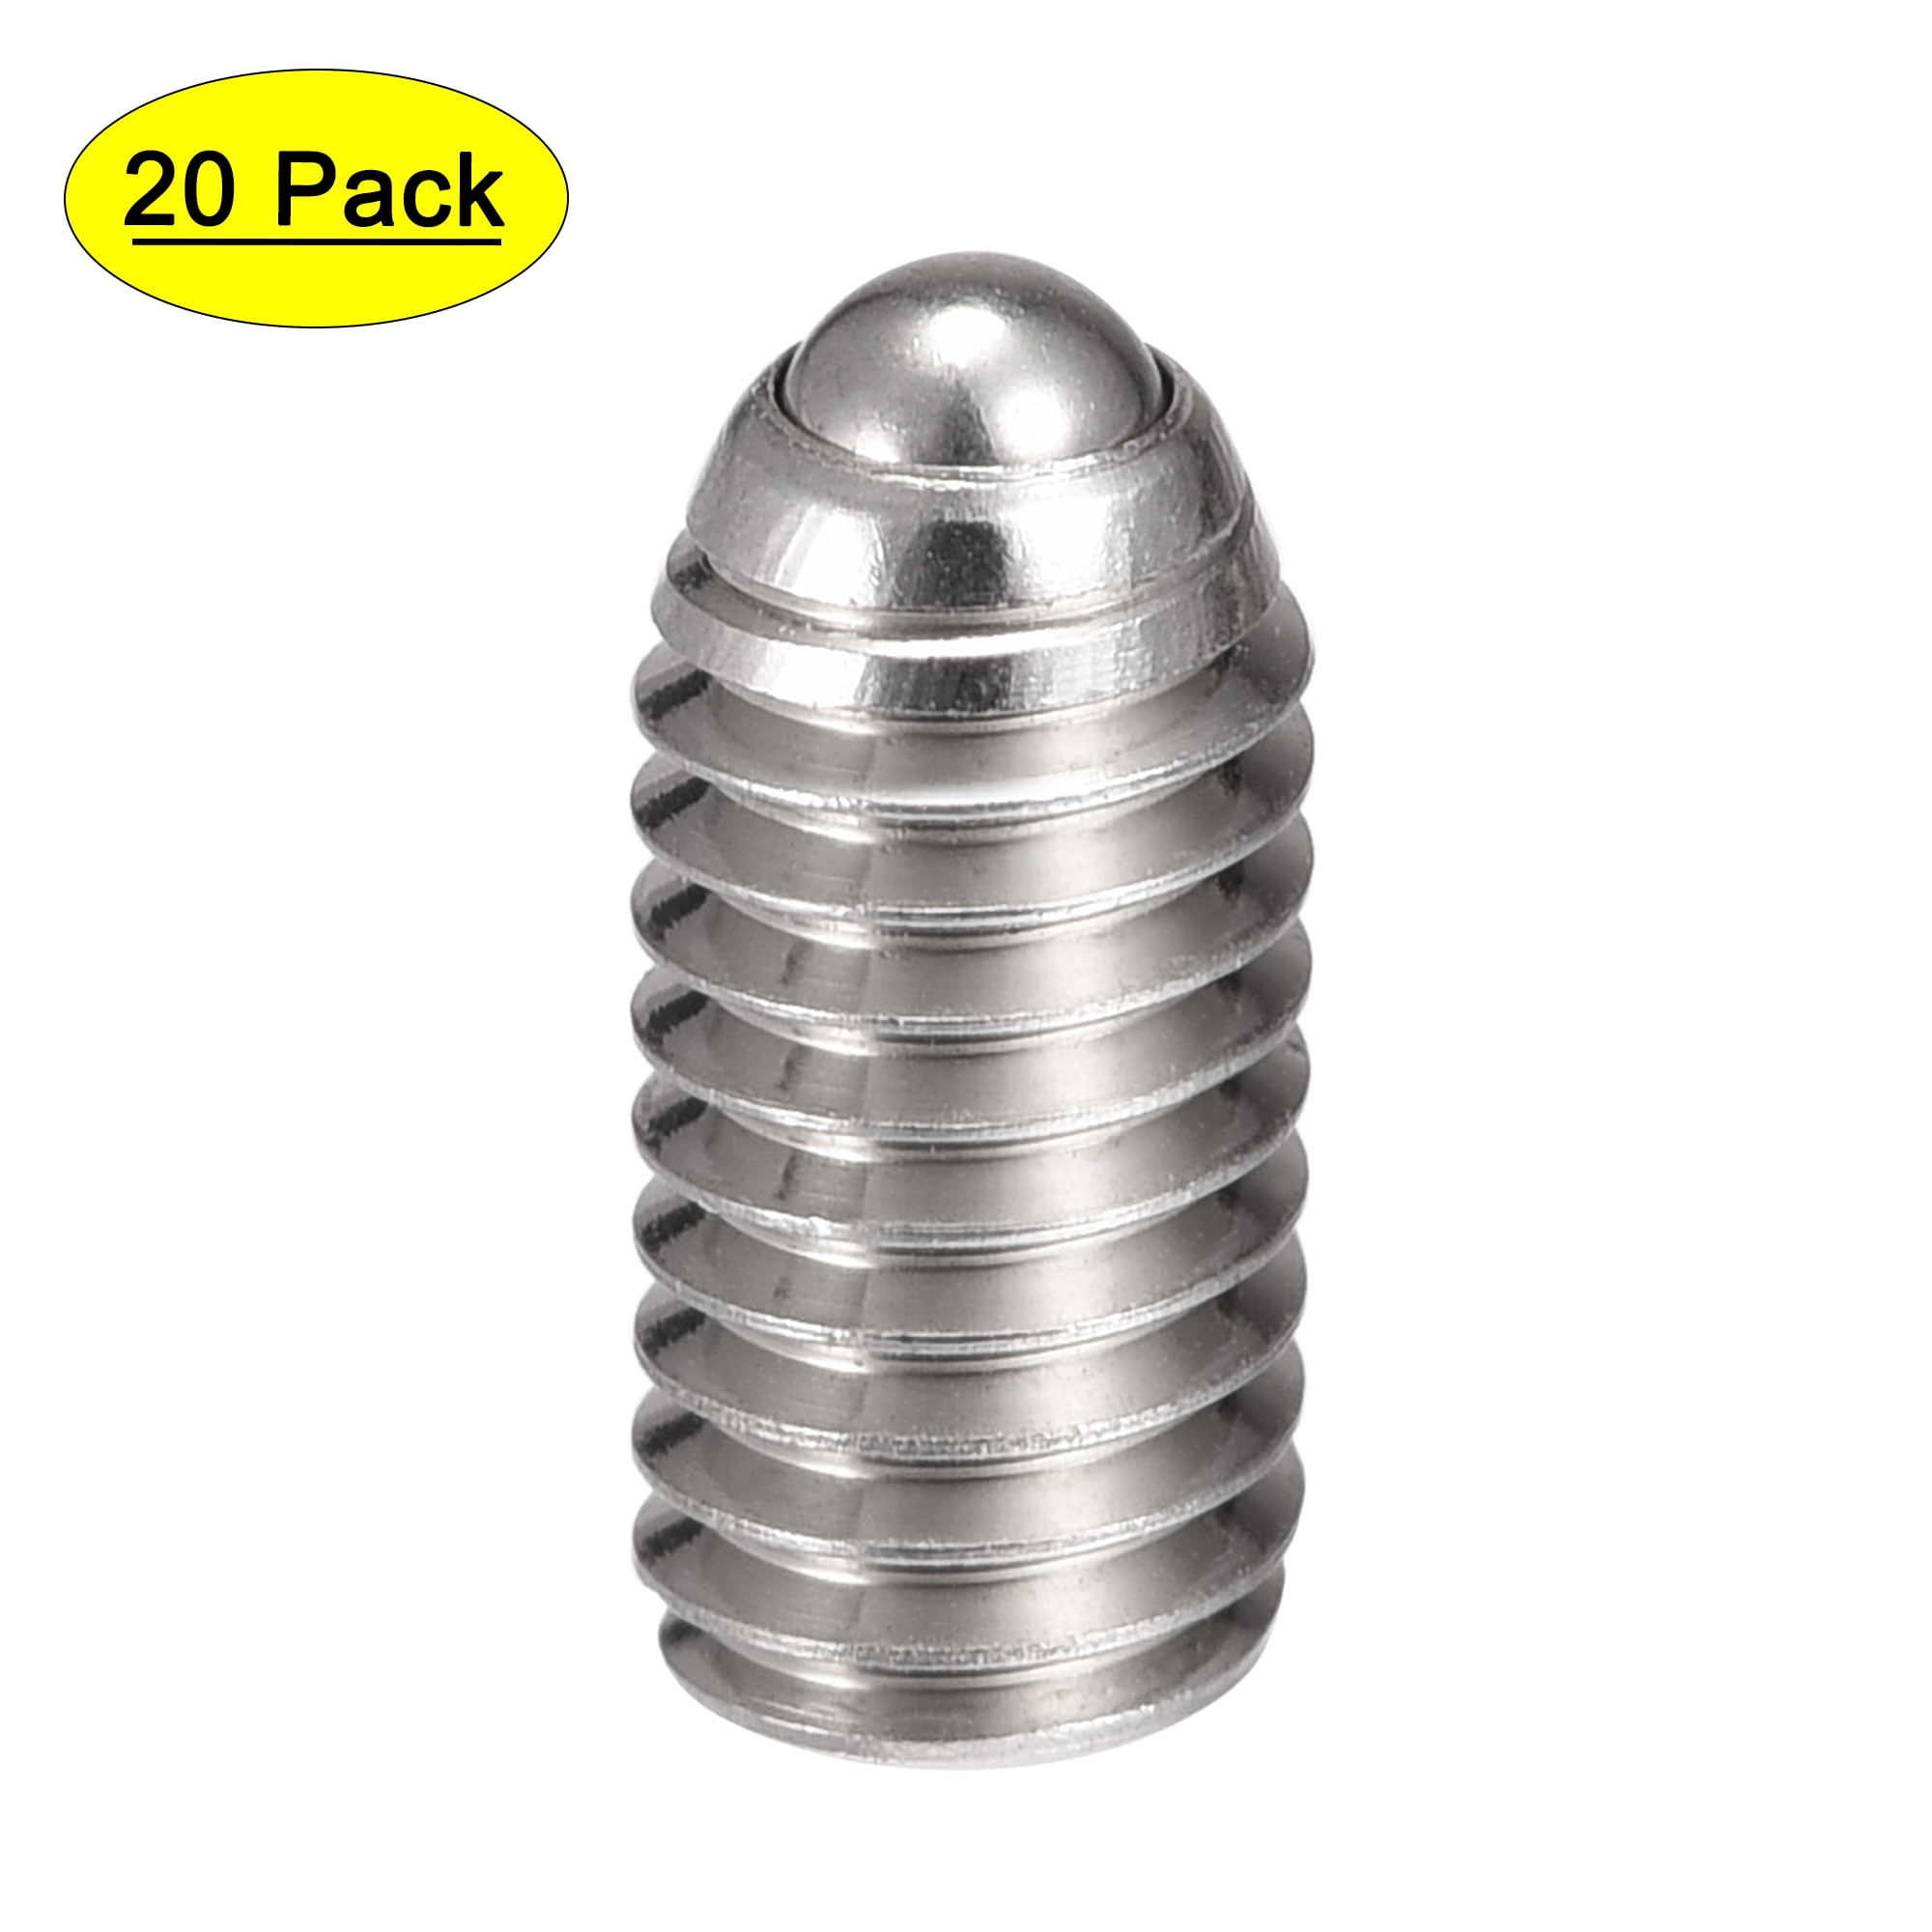 Cup Point M6 x 1 x 40mm Length Stainless Steel Metric Set Screws 20 Pcs 